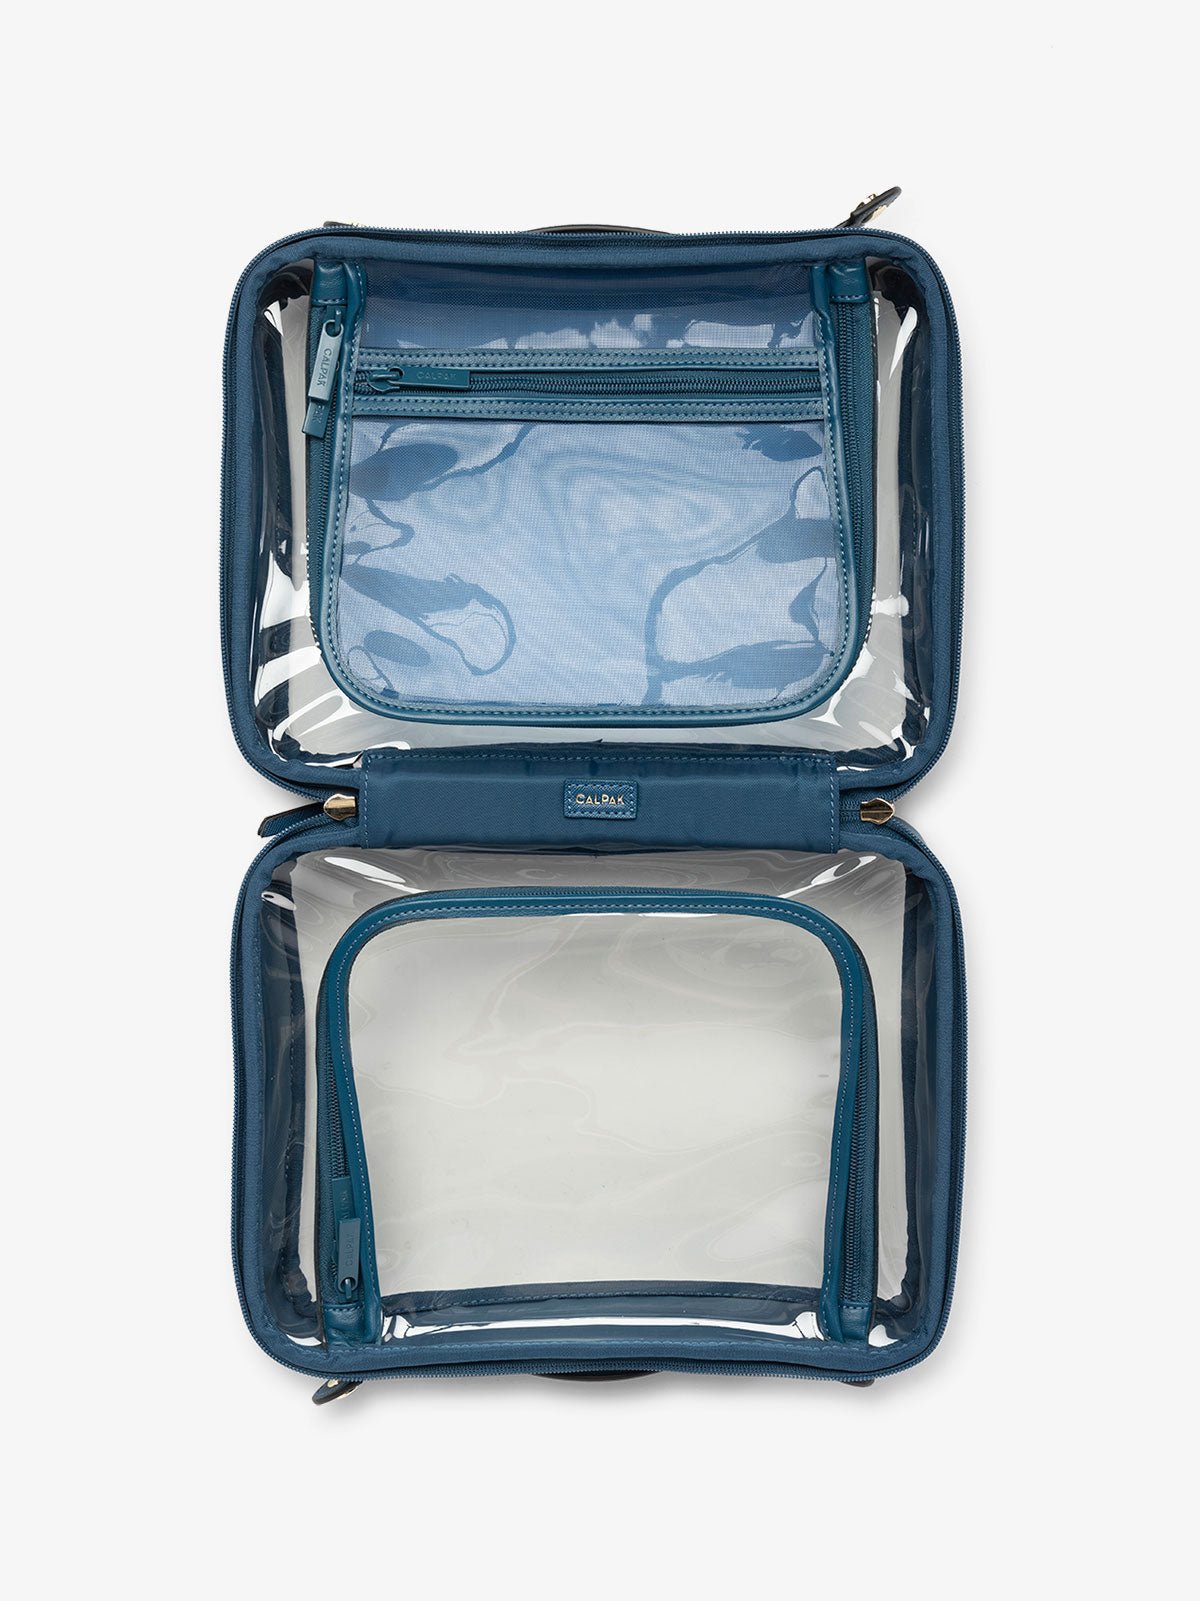 CALPAK large transparent water resistant travel makeup bag with compartments in deep sea